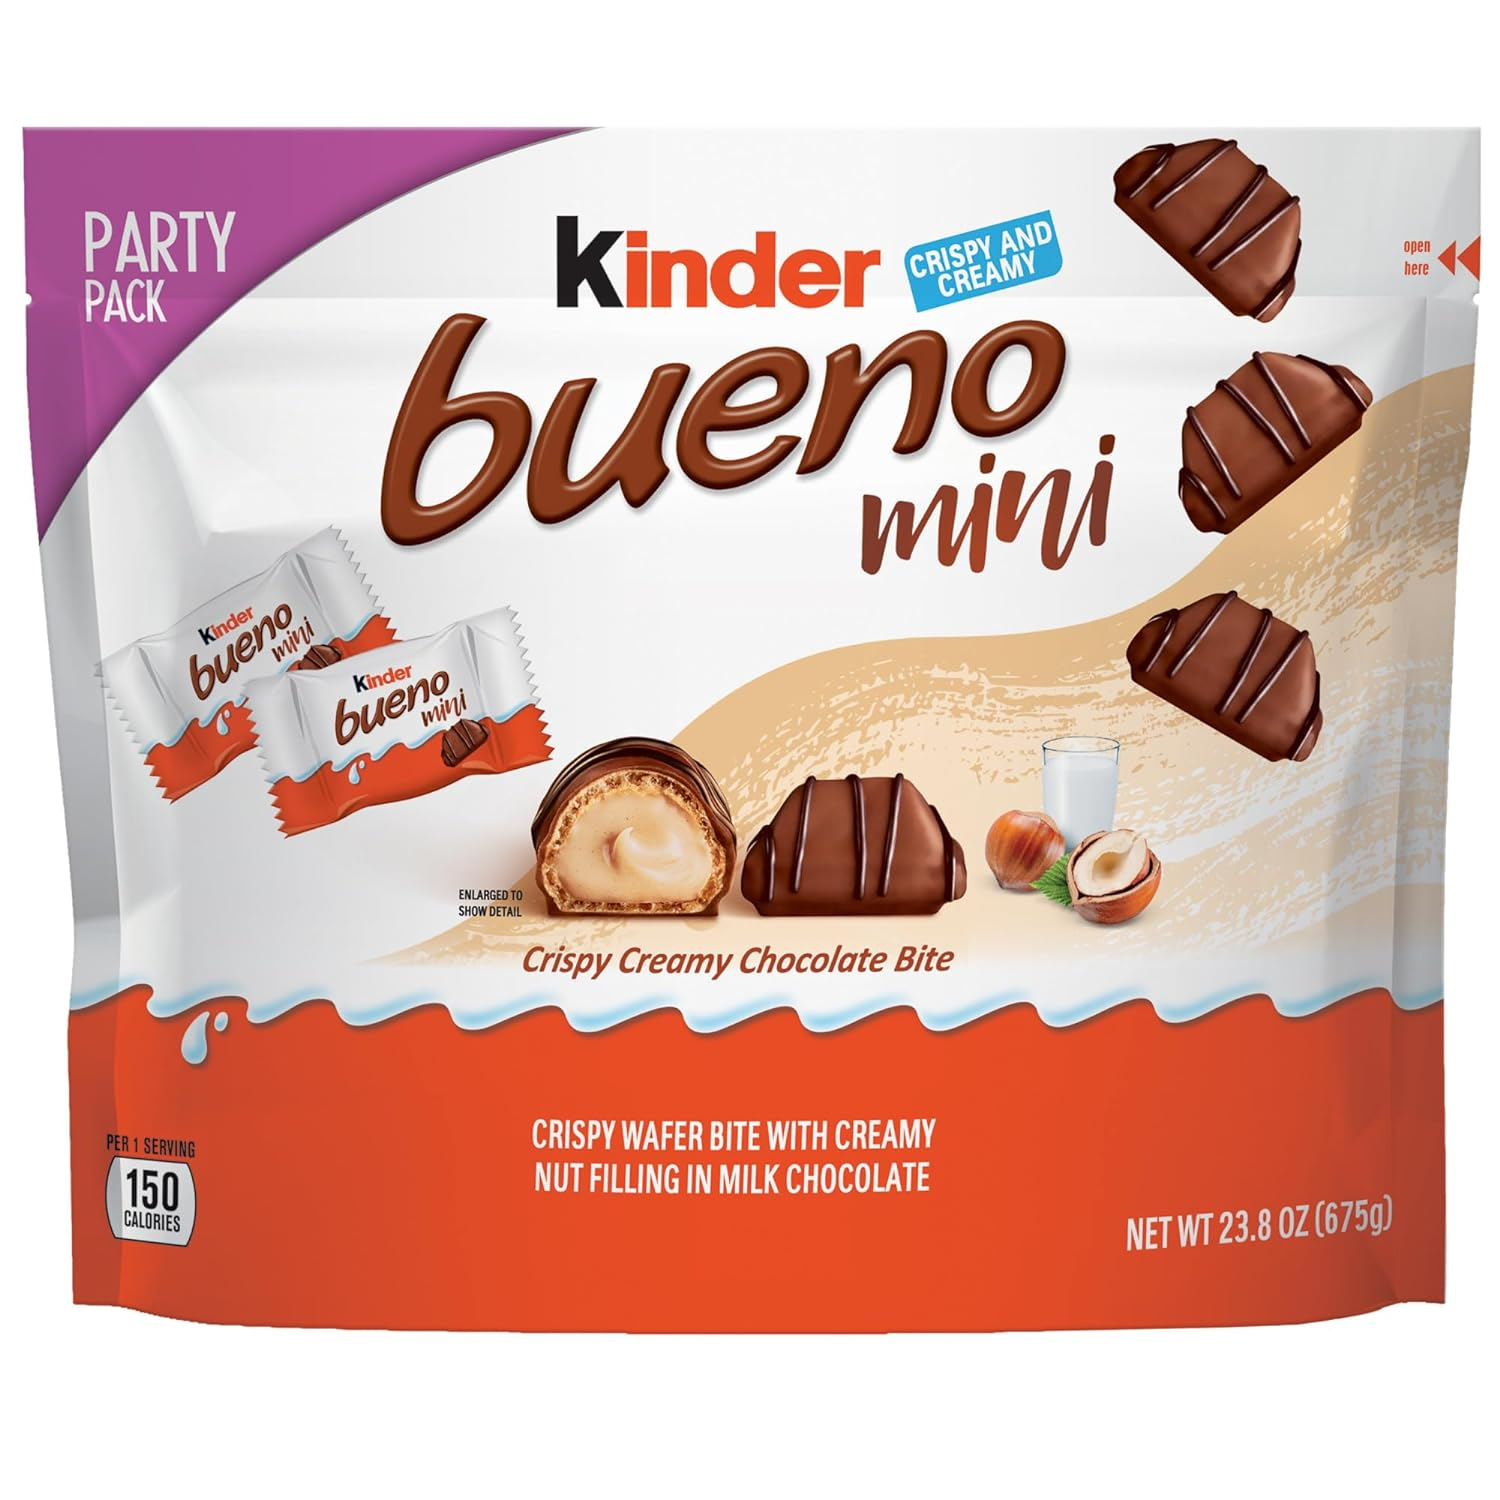 Amazon.com : Kinder Bueno Mini, 125 Count Party Pack, Milk Chocolate and Hazelnut Cream, Individually Wrapped Chocolate Bars, 23.8 oz : Grocery & Gourmet Food $10.84